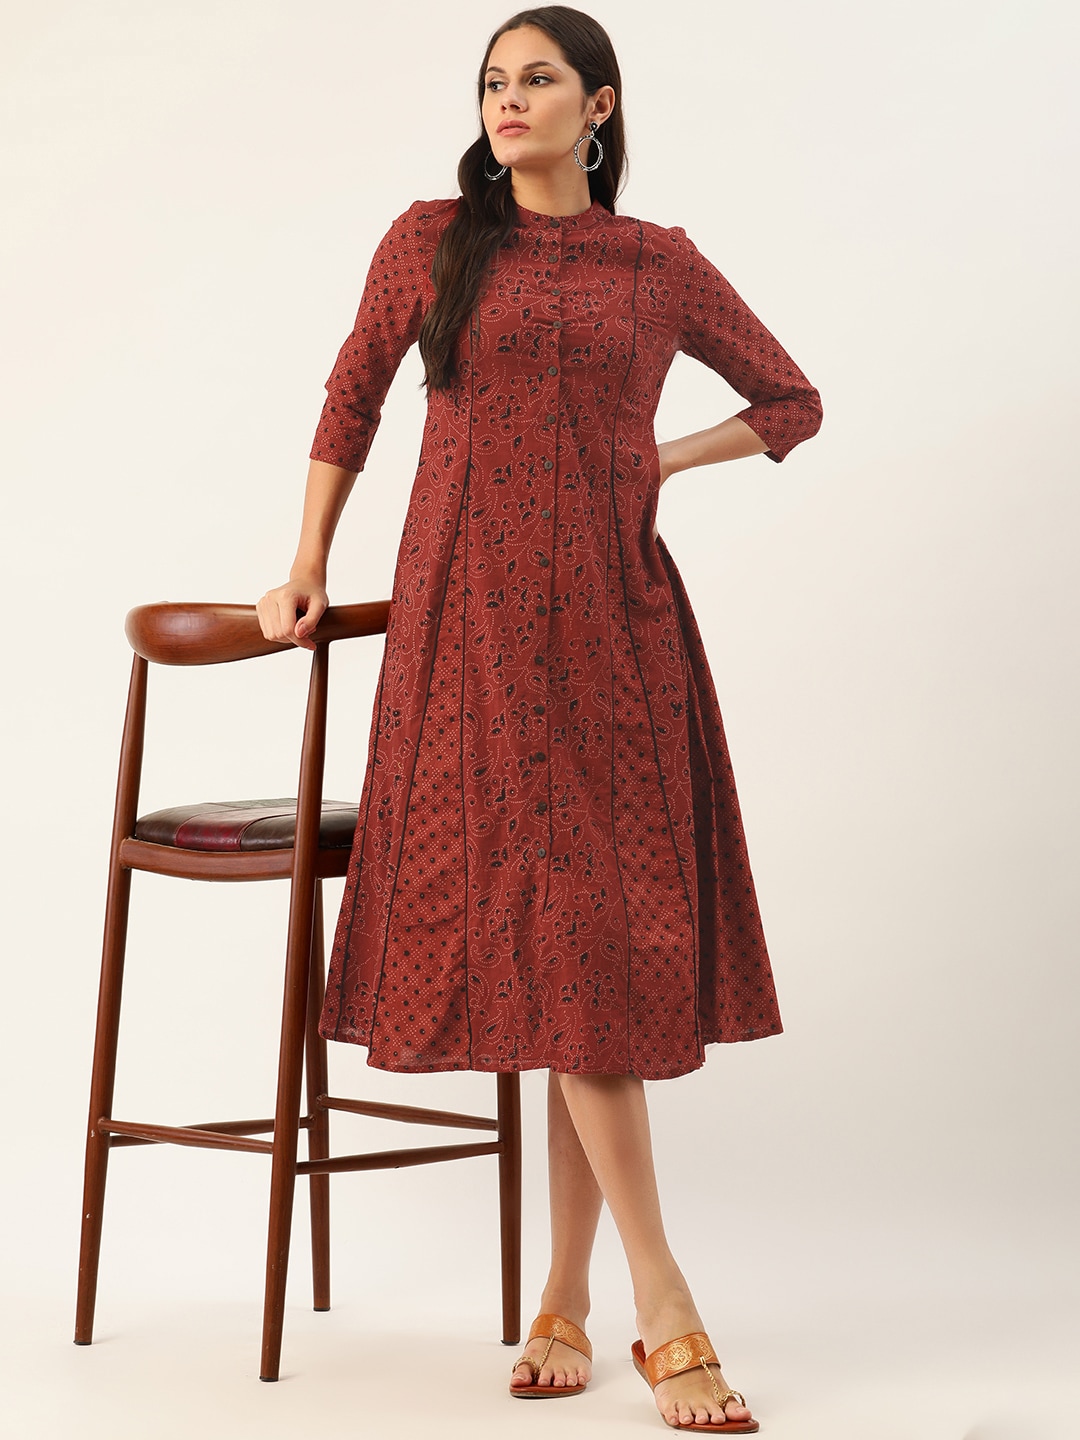 Taavi Women Red & Black Ajrakh Hand Block Print Cotton Sustainable A-Line Dress Price in India